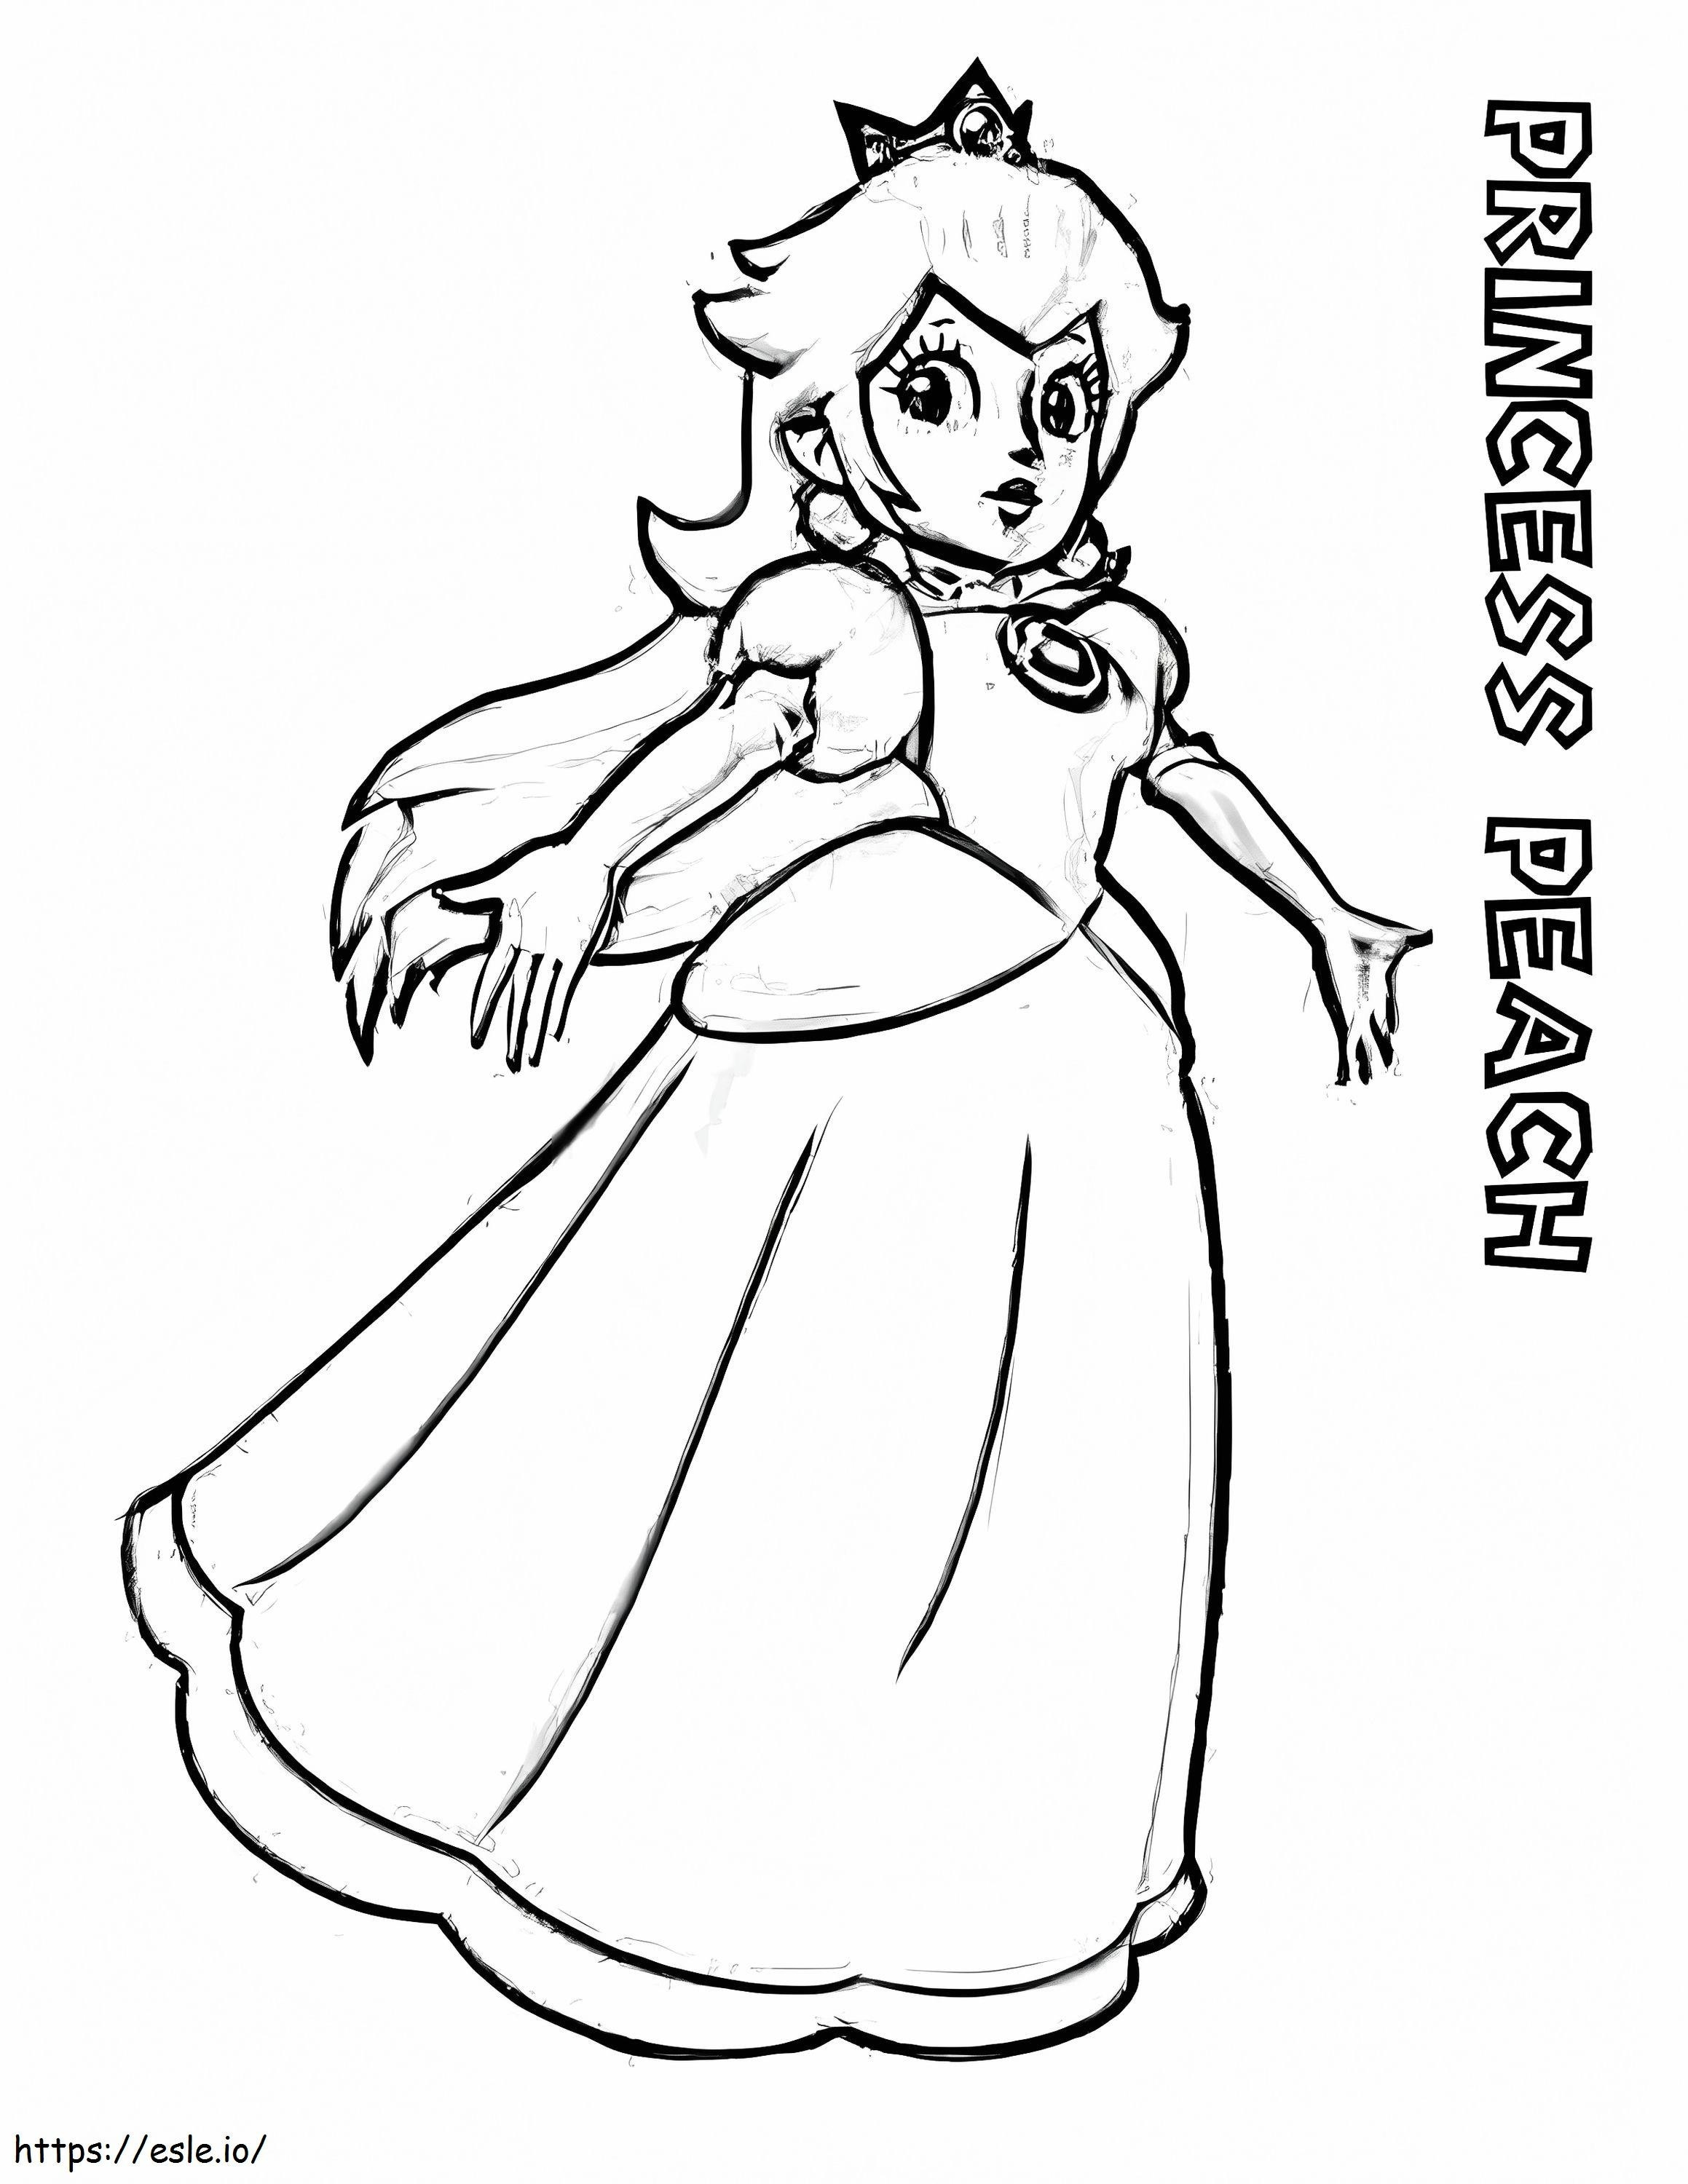 Princess Peach From Mario coloring page